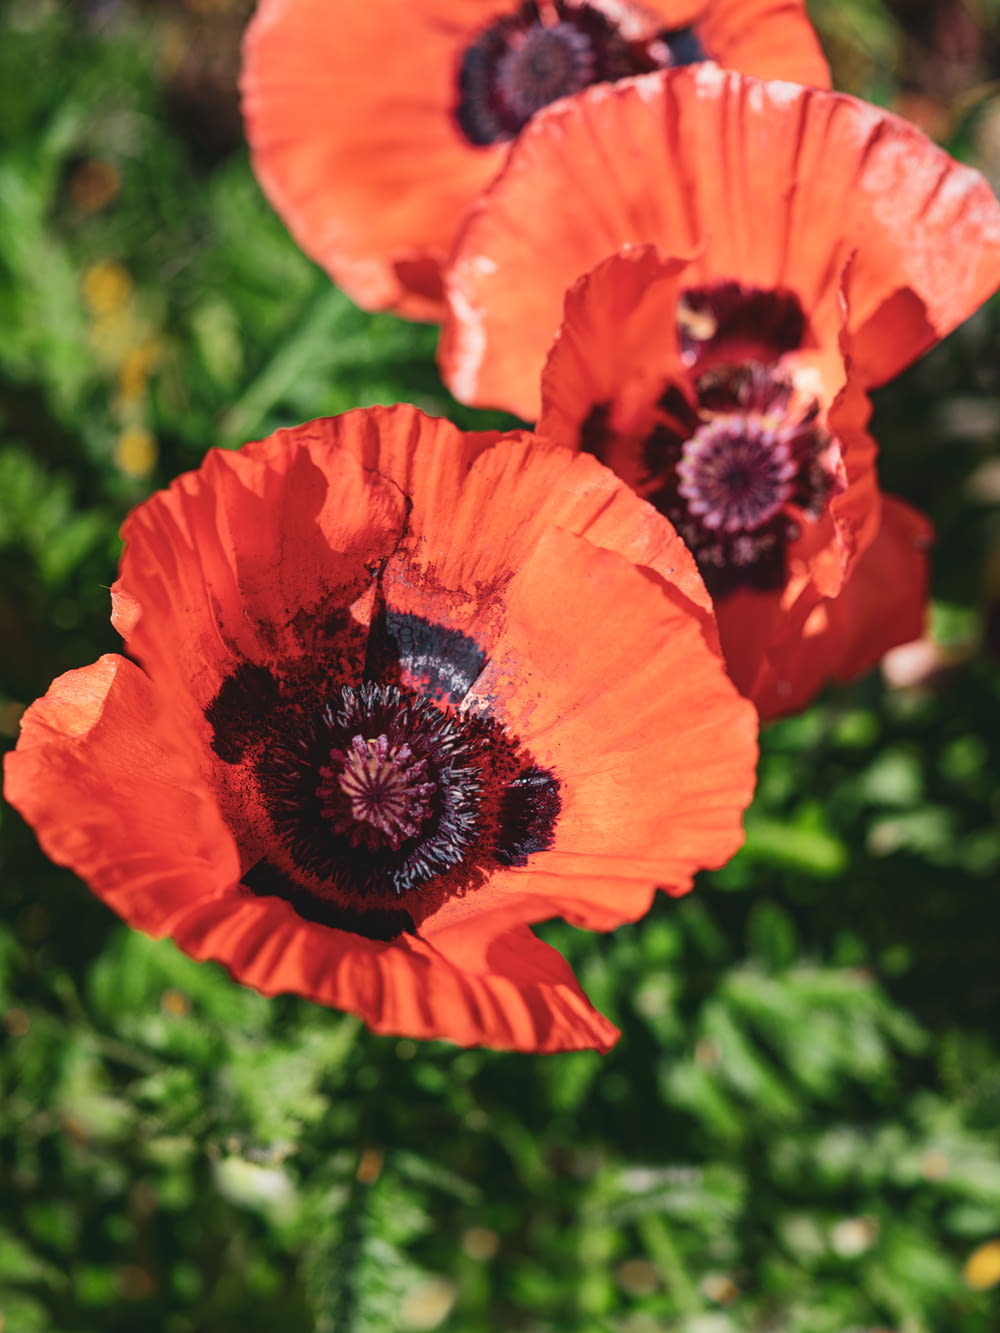 red poppy flowers in close-up photography